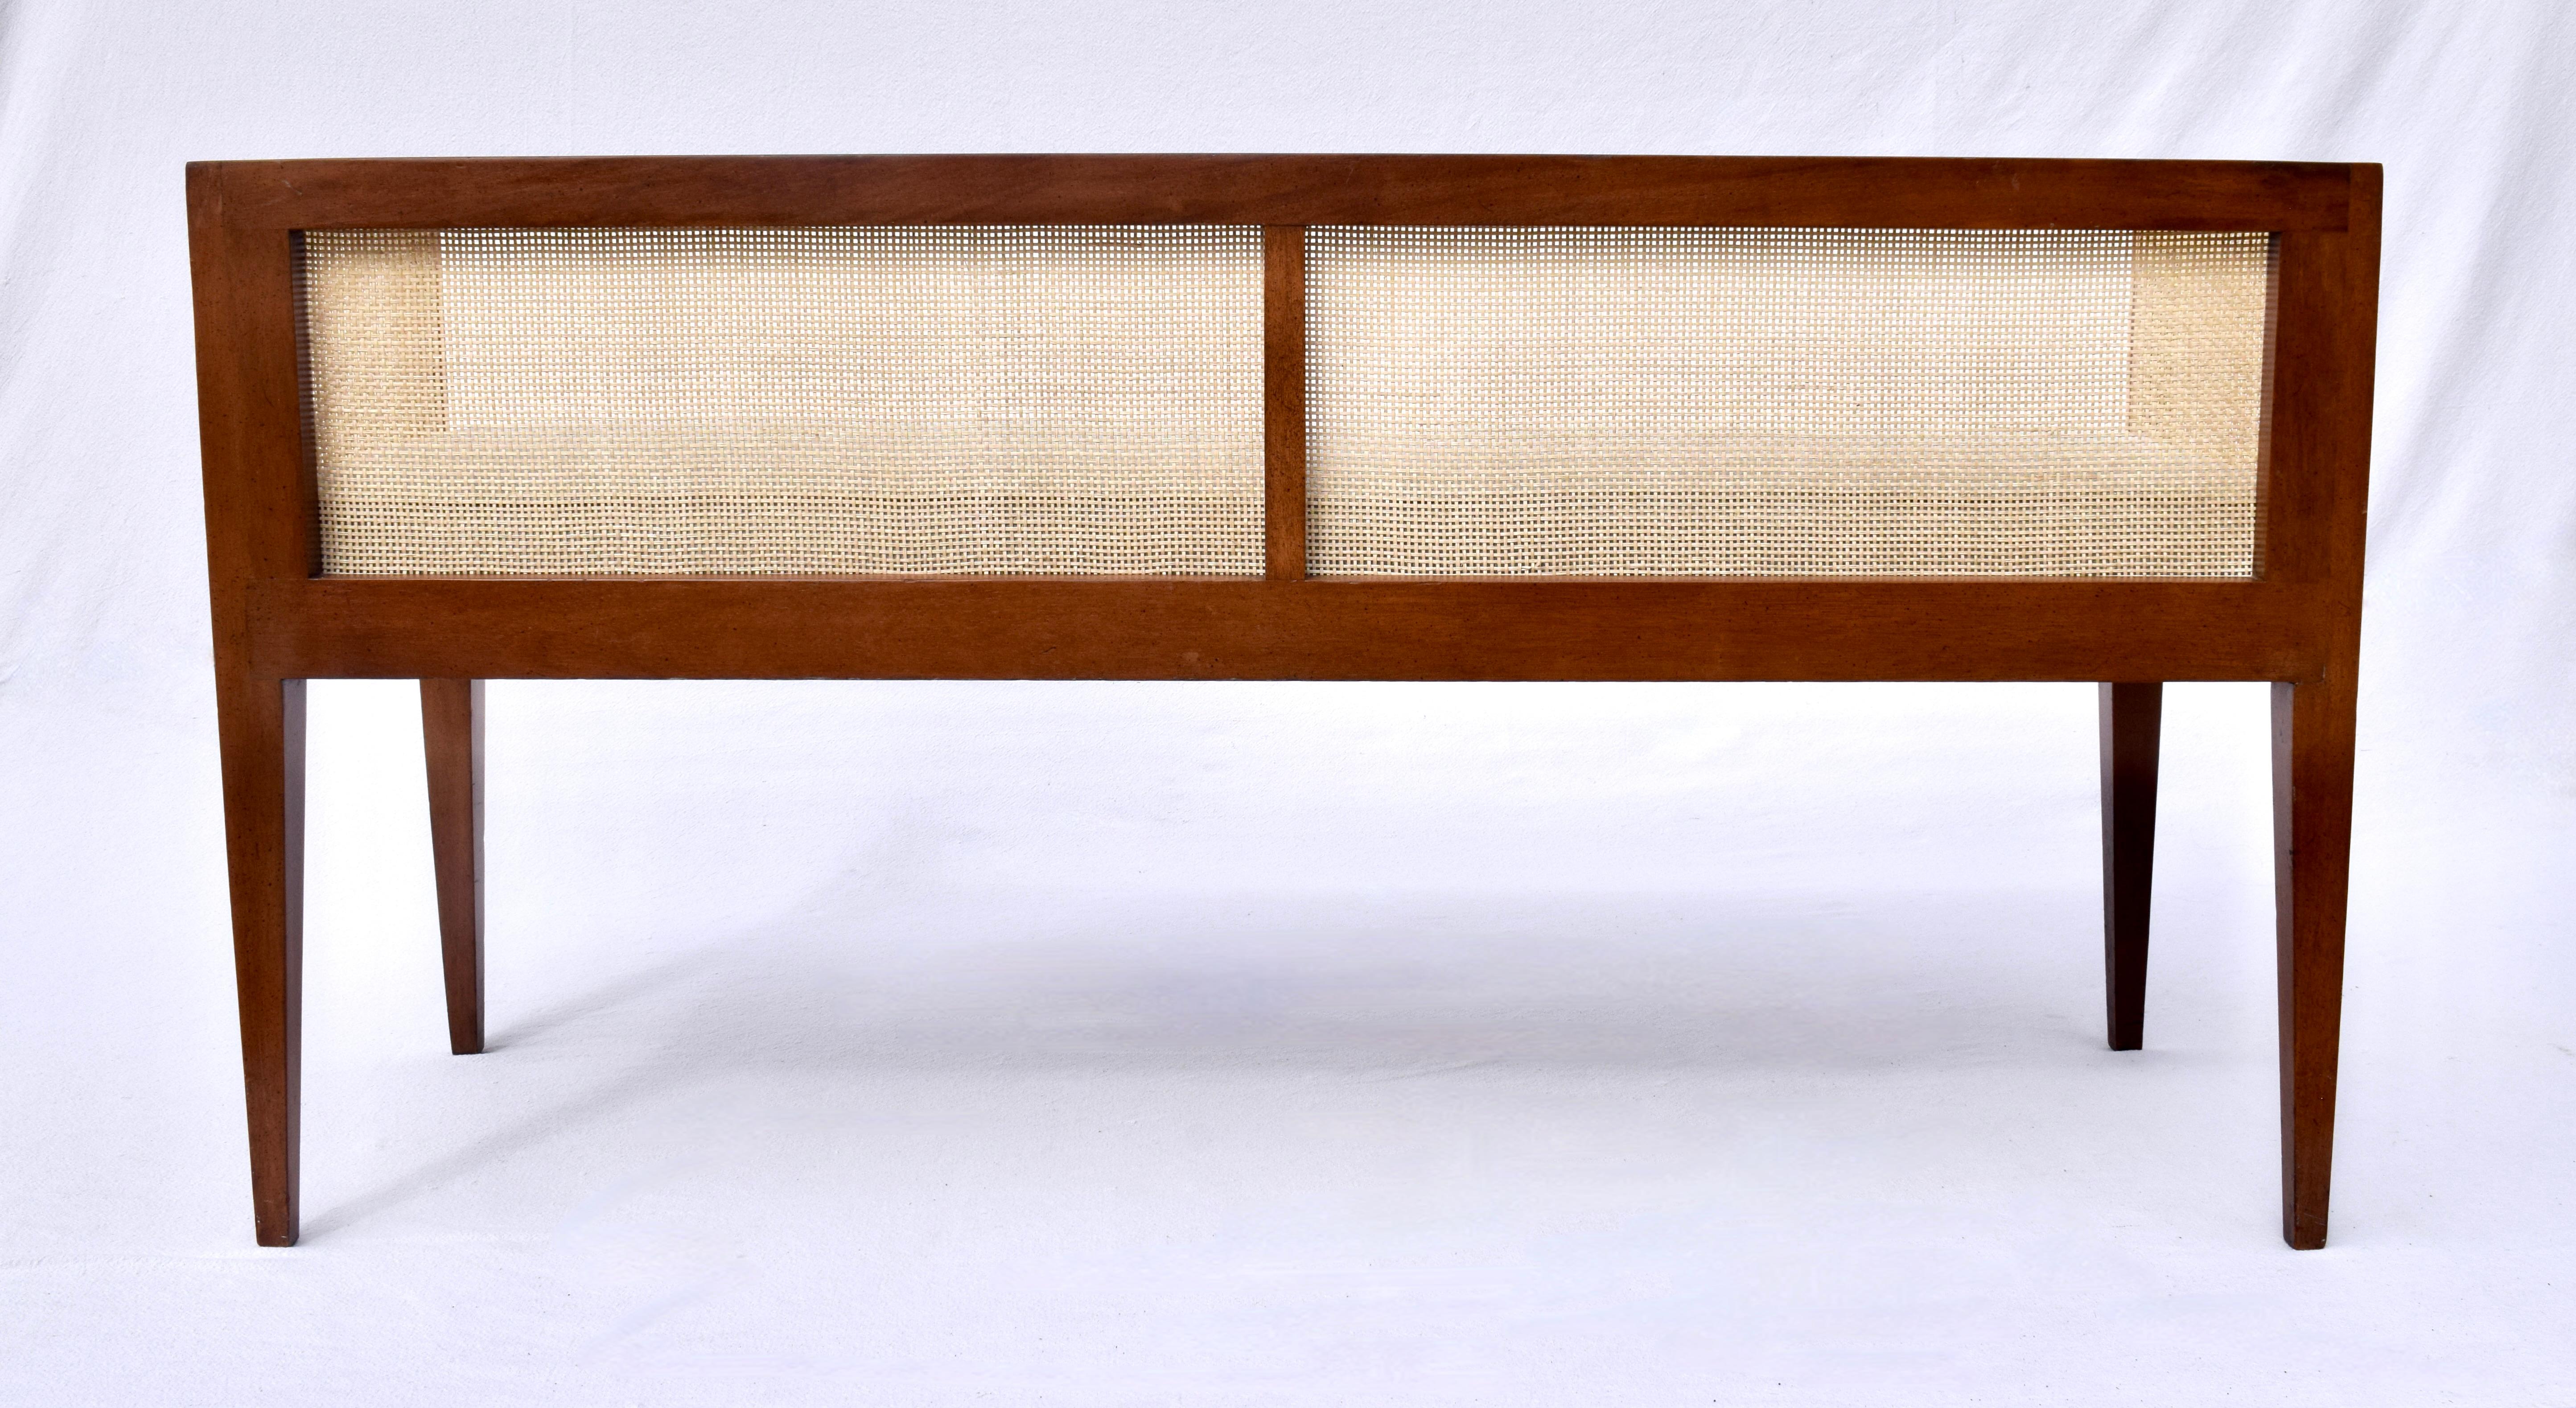 1950s Walnut Window Bench Attributed to Edward Wormley for Dunbar For Sale 3